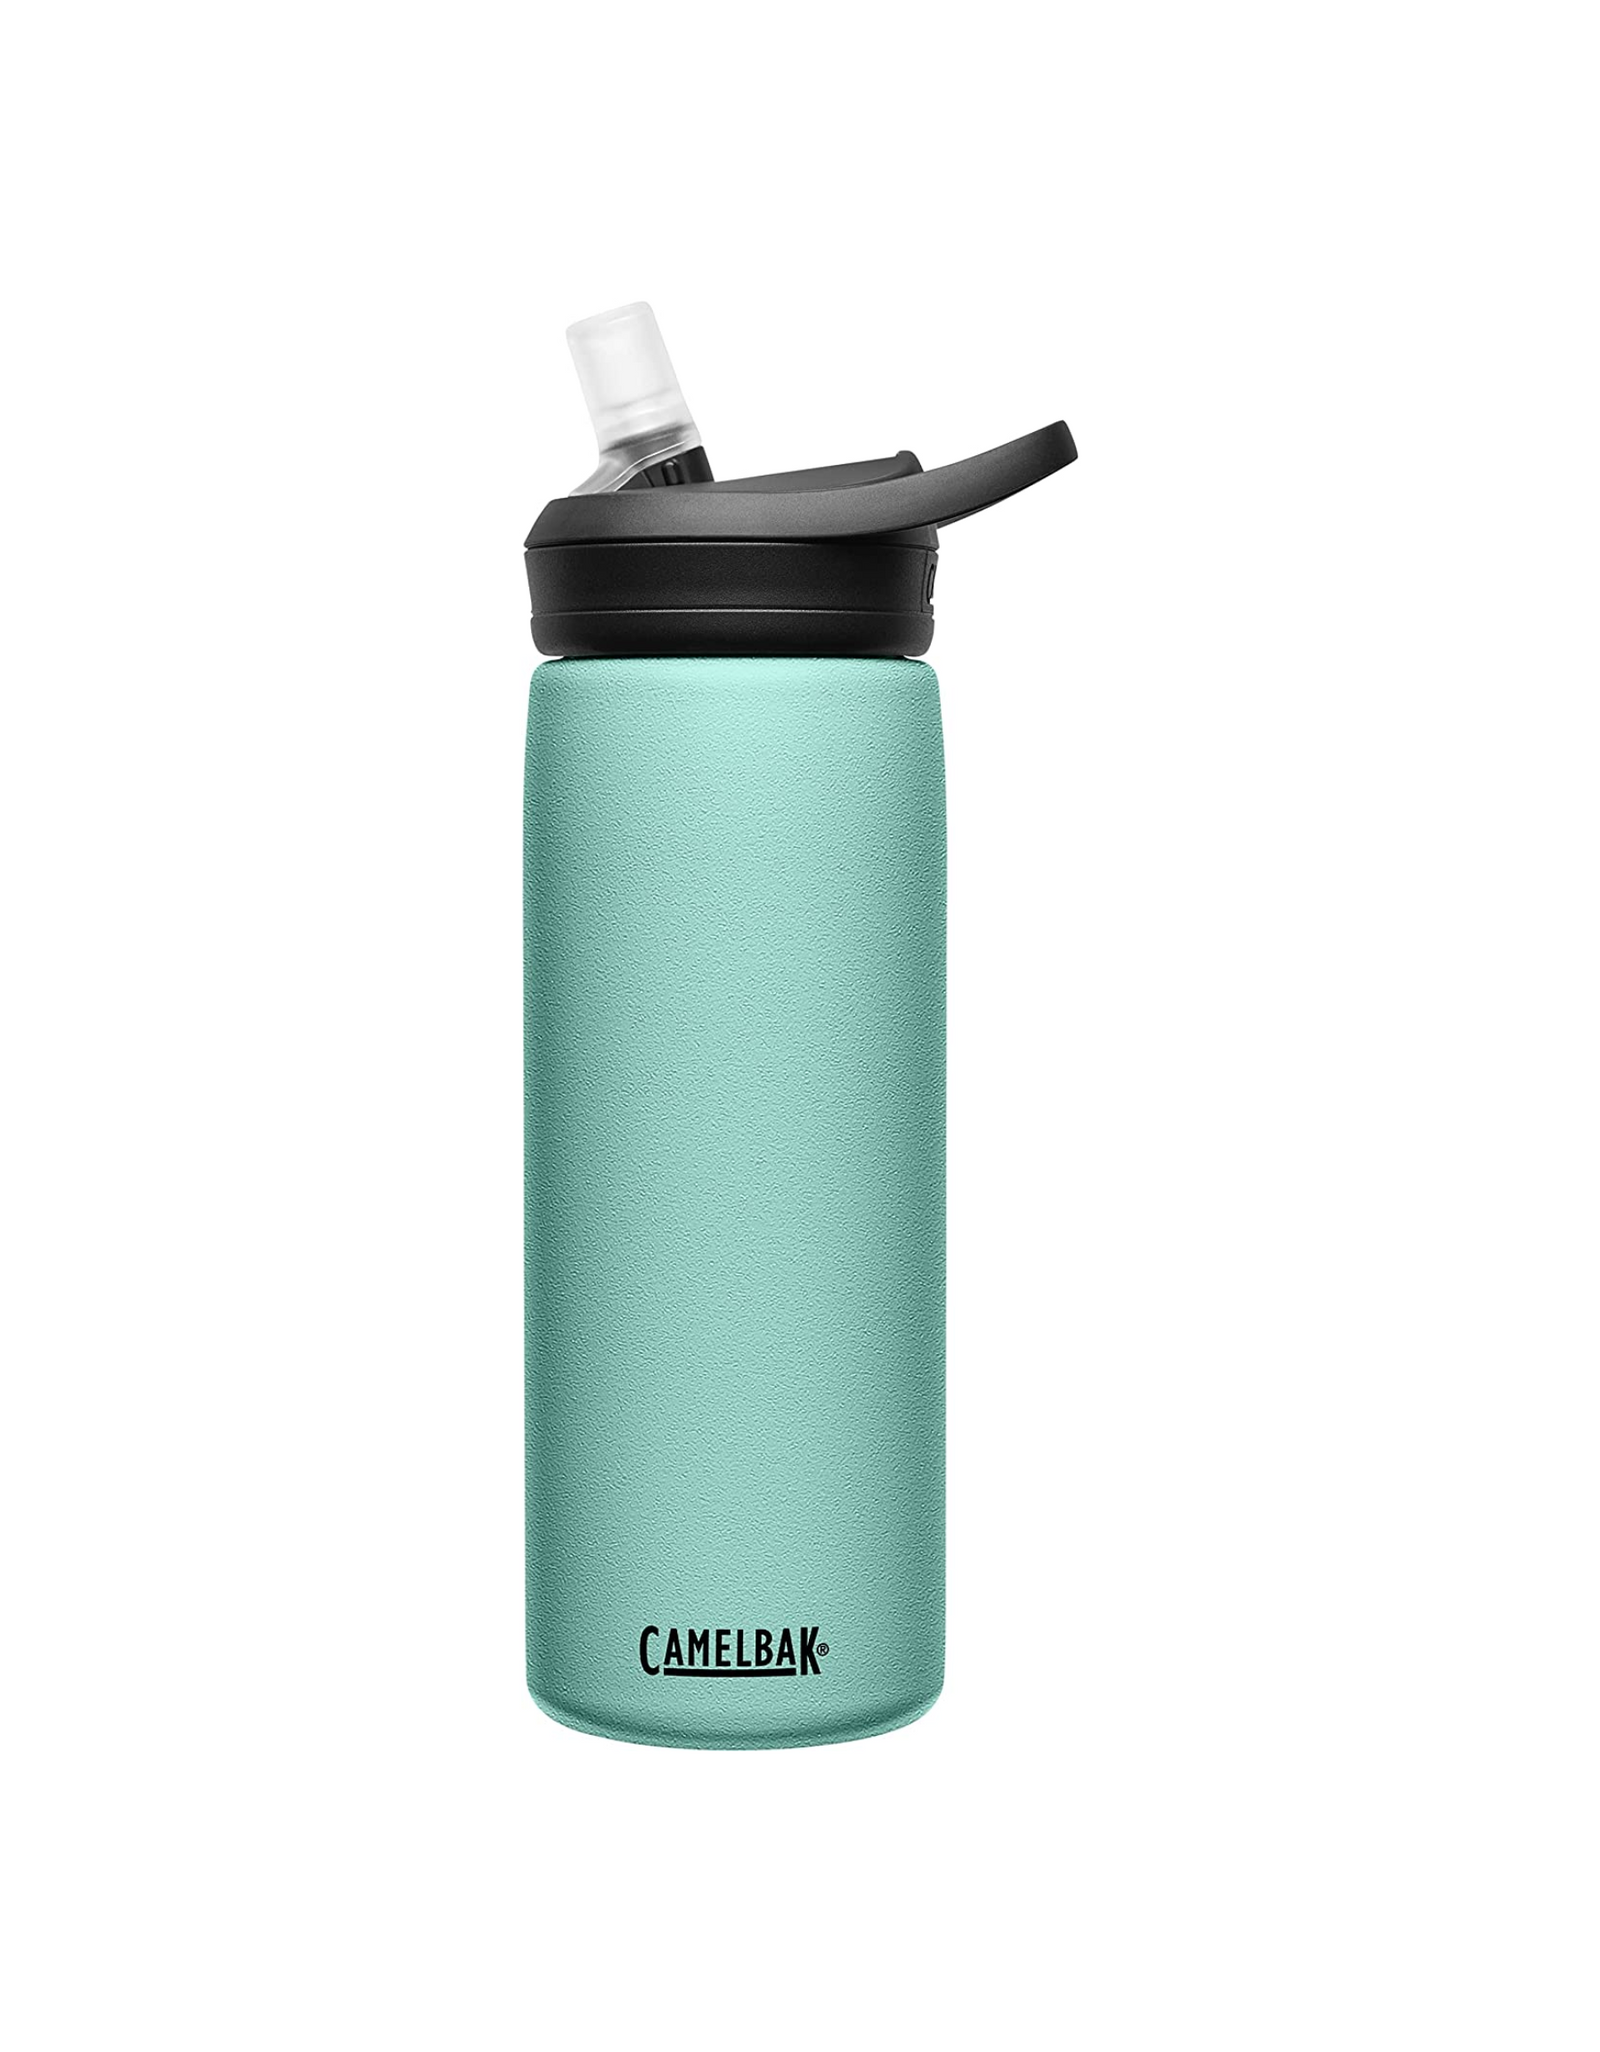 CamelBak Eddy+ Water Bottle with Straw, Insulated, Stainless Steel, 20 oz, Coastal